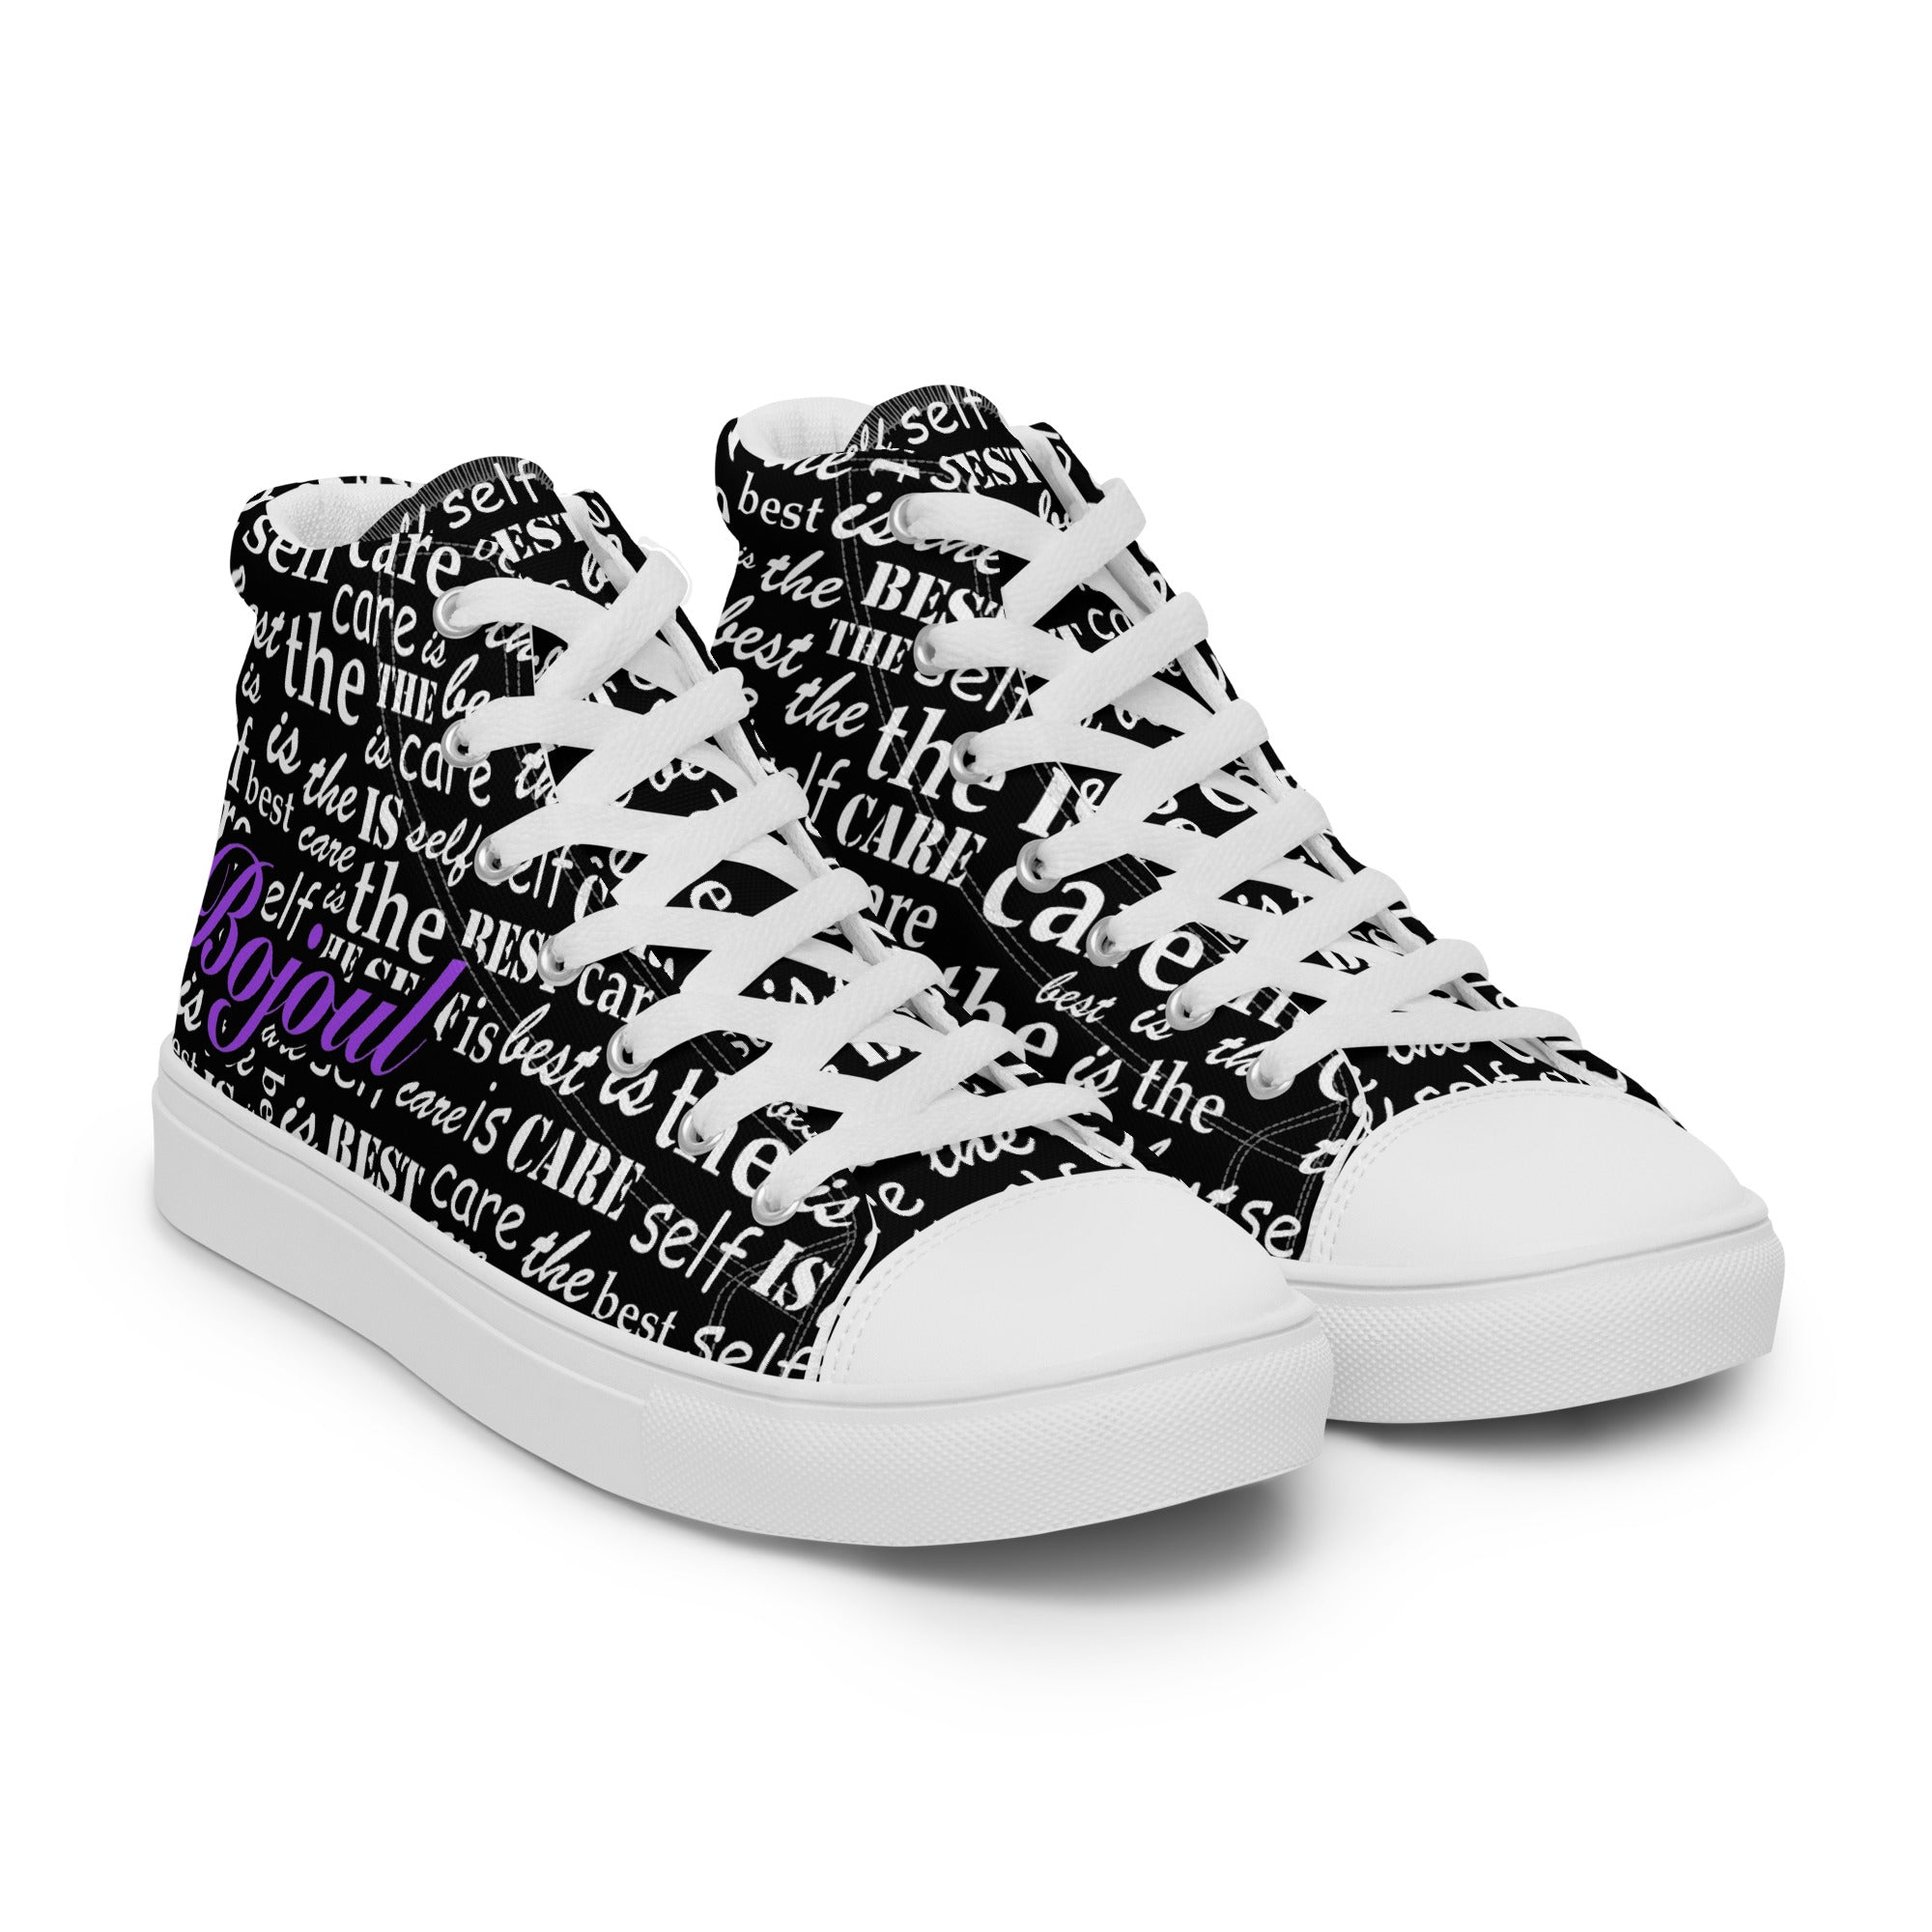 Bojoul Self- Care Women’s High Top Canvas Sneakers